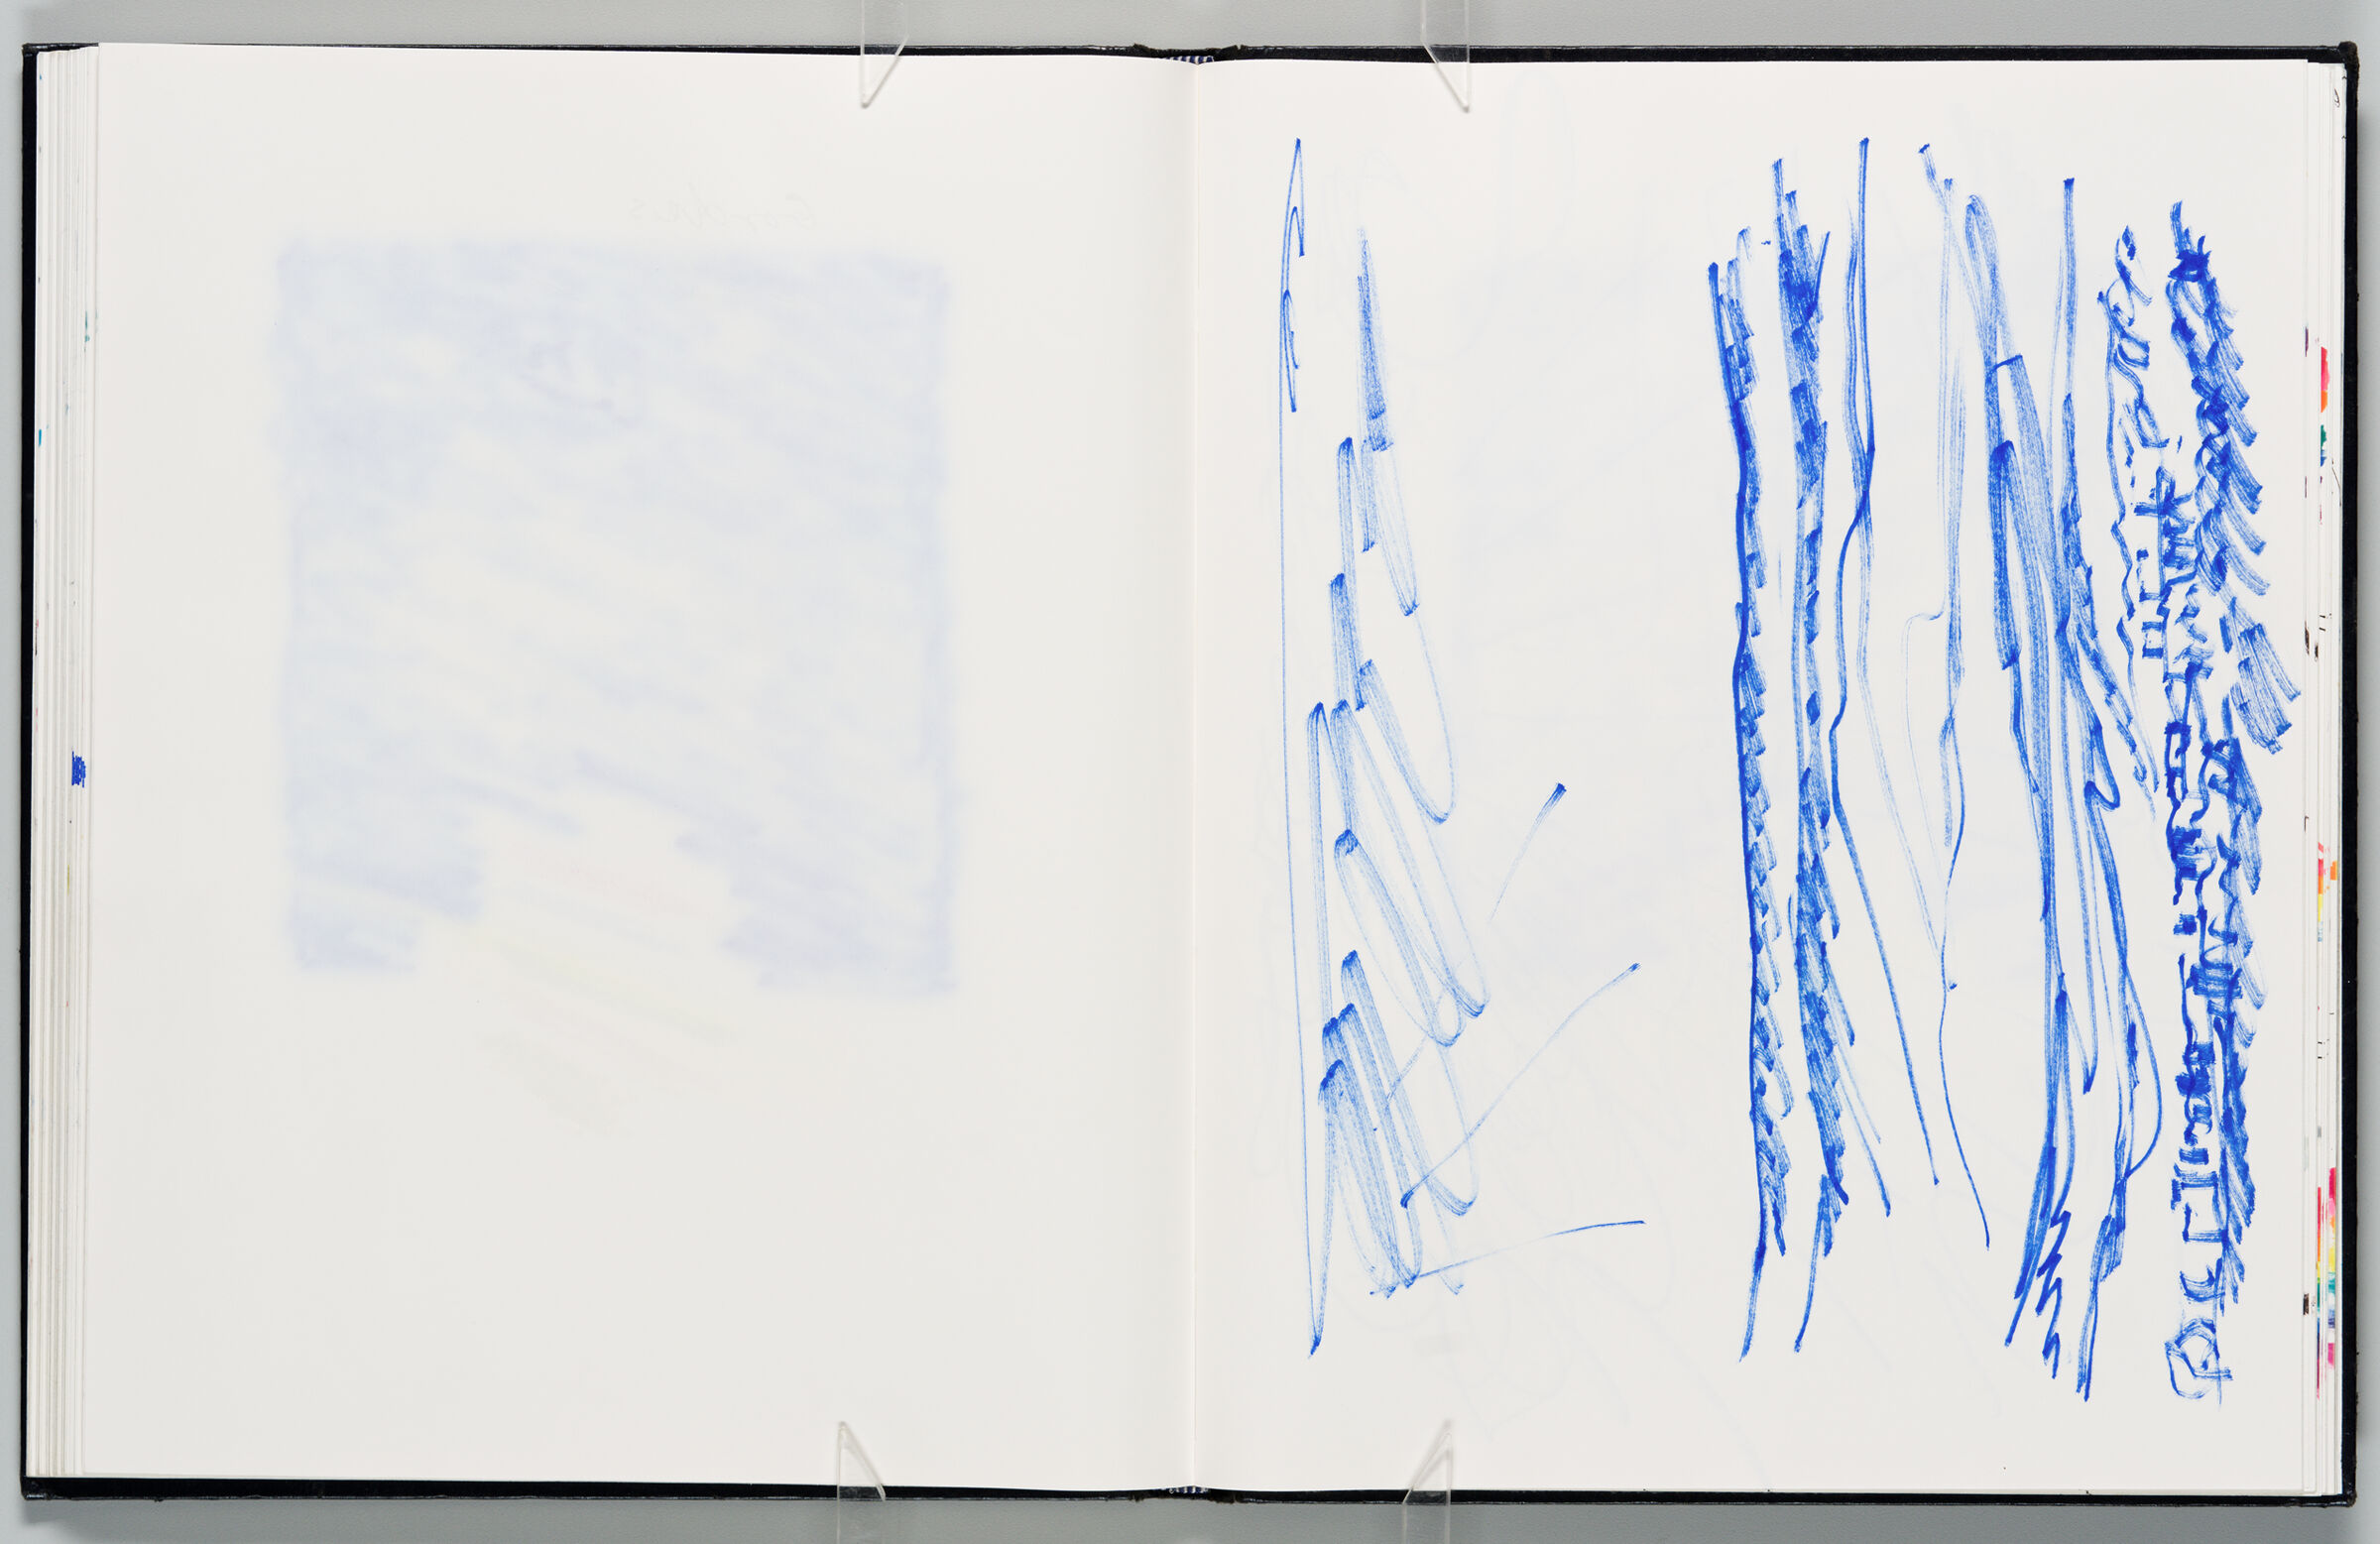 Untitled (Blank With Color Transfer, Left Page); Untitled (Gordes Landscape, Right Page)